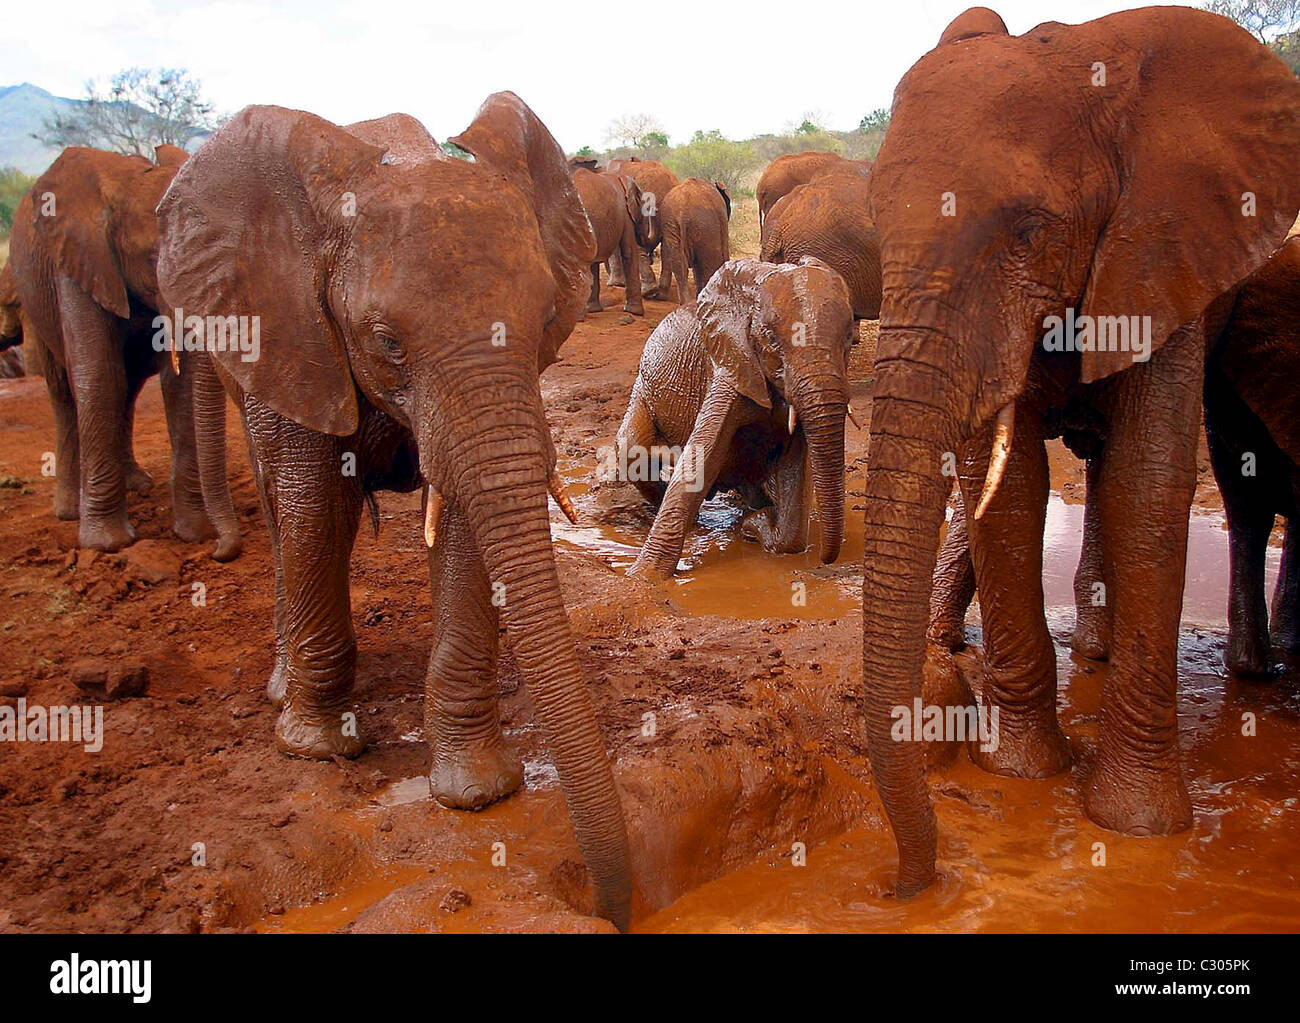 HERD OF AFRICAN ELEPHANT (LOXODONTA AFRICANA) TSAVO NATIONAL PARK. THE RED CLAY GIVES THE ELEPHANTS A RED COLOURING Stock Photo